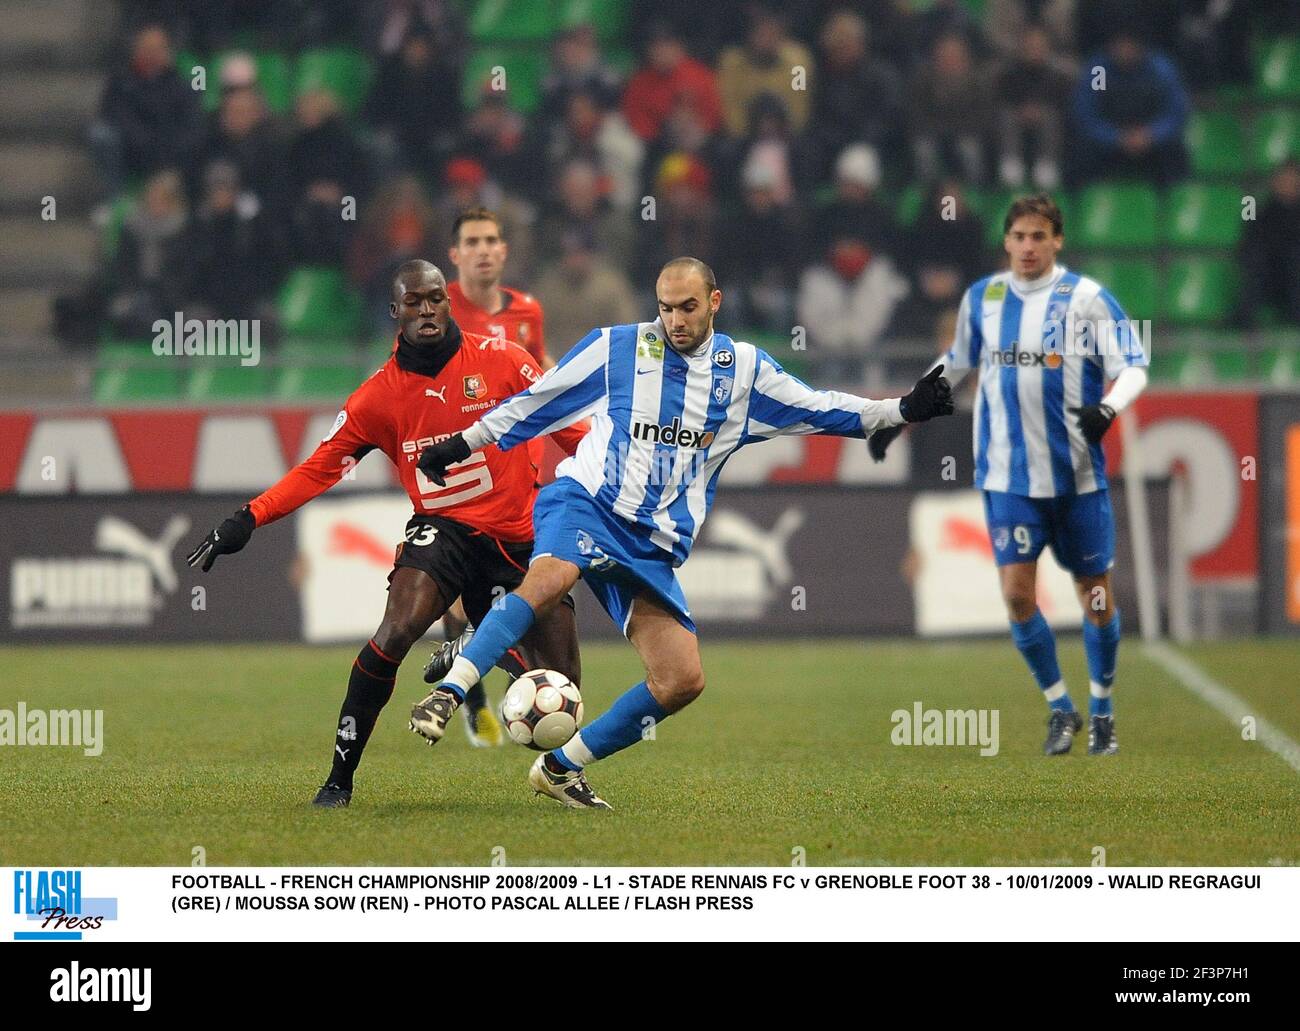 FOOTBALL - FRENCH CHAMPIONSHIP 2008/2009 - L1 - STADE RENNAIS FC v GRENOBLE  FOOT 38 - 10/01/2009 - WALID REGRAGUI (GRE) / MOUSSA SOW (REN) - PHOTO  PASCAL ALLEE / FLASH PRESS Stock Photo - Alamy